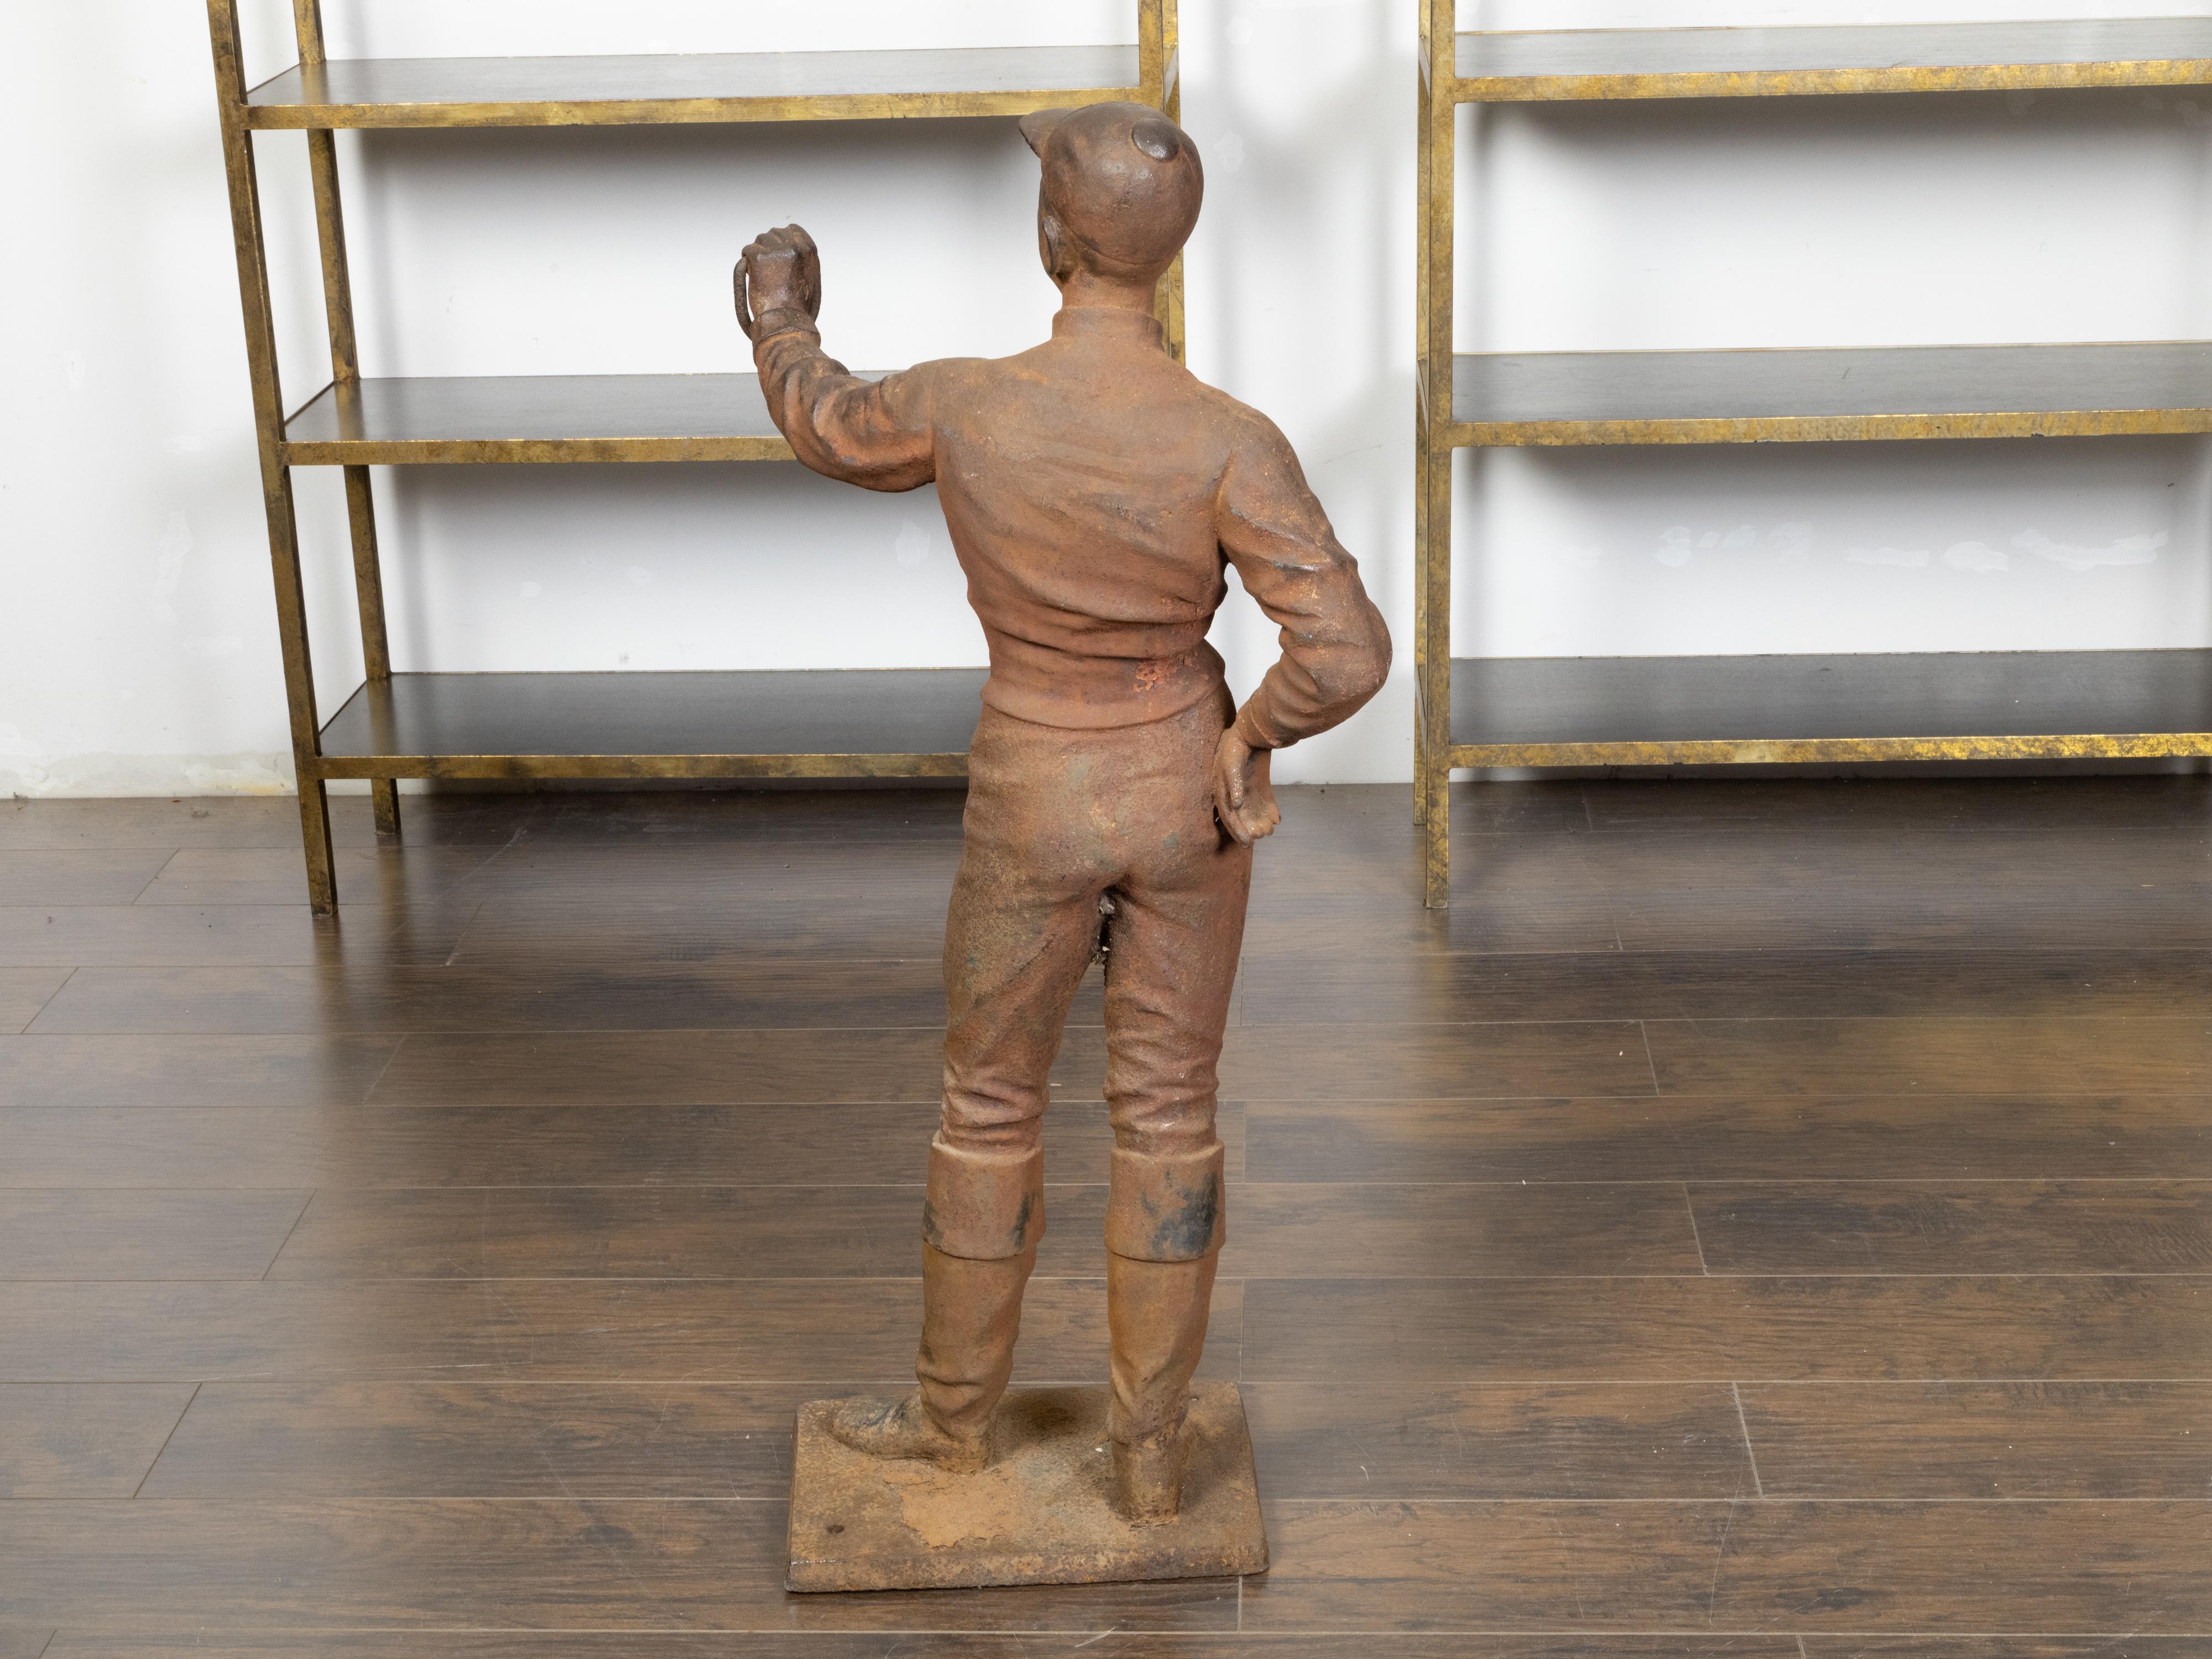 English Turn of the Century Iron Sculpture of a Jockey with Weathered Patina In Good Condition For Sale In Atlanta, GA